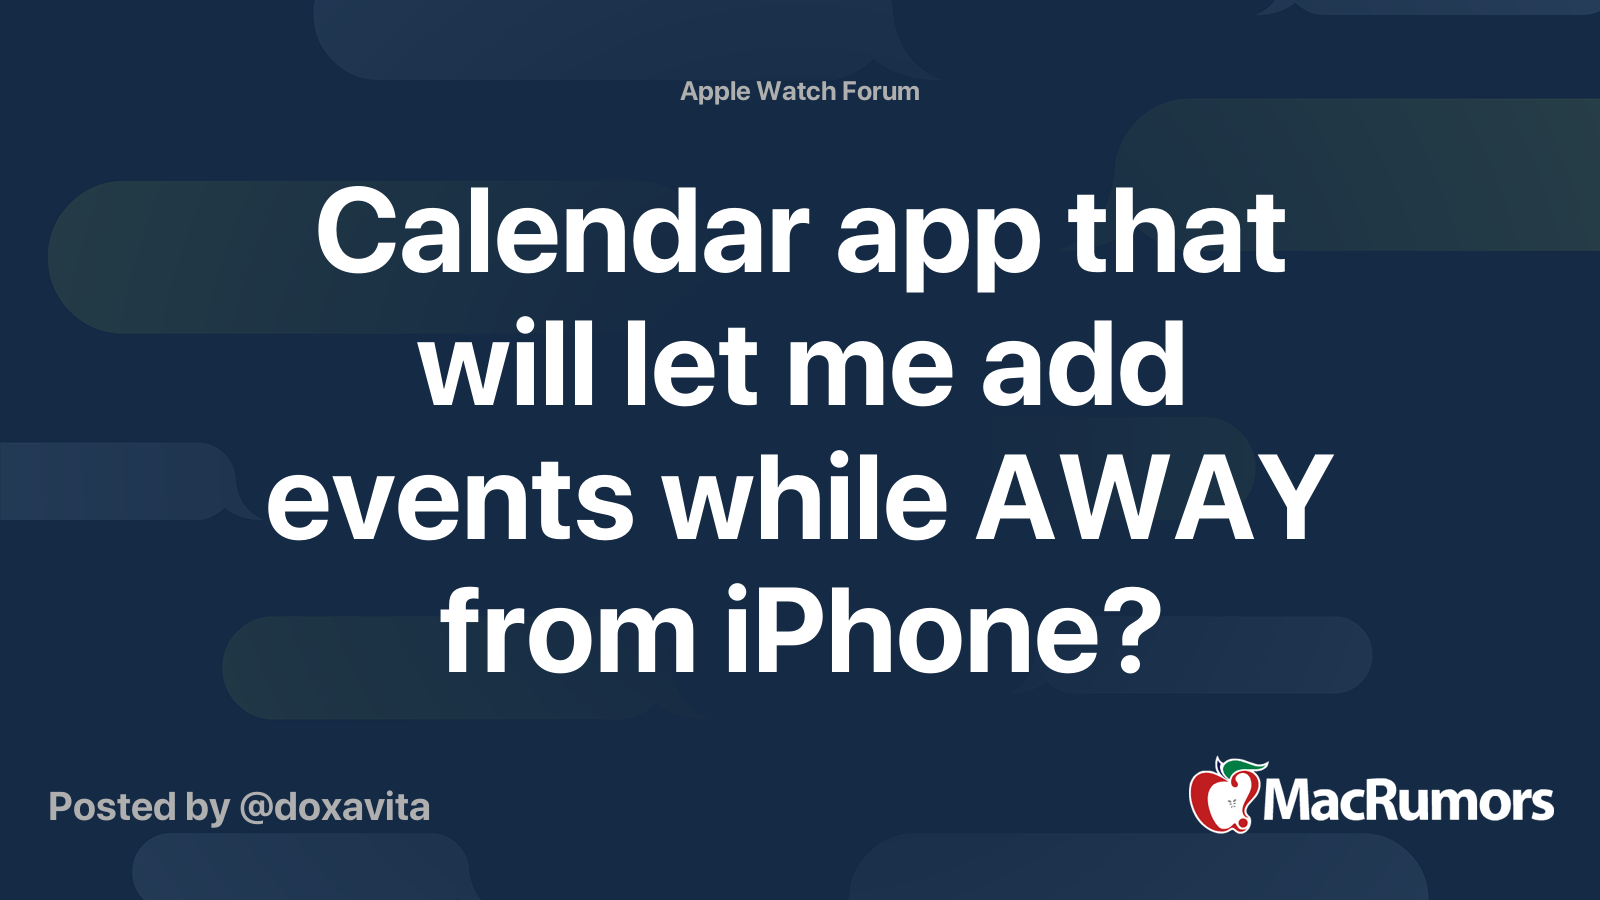 Calendar app that will let me add events while AWAY from iPhone